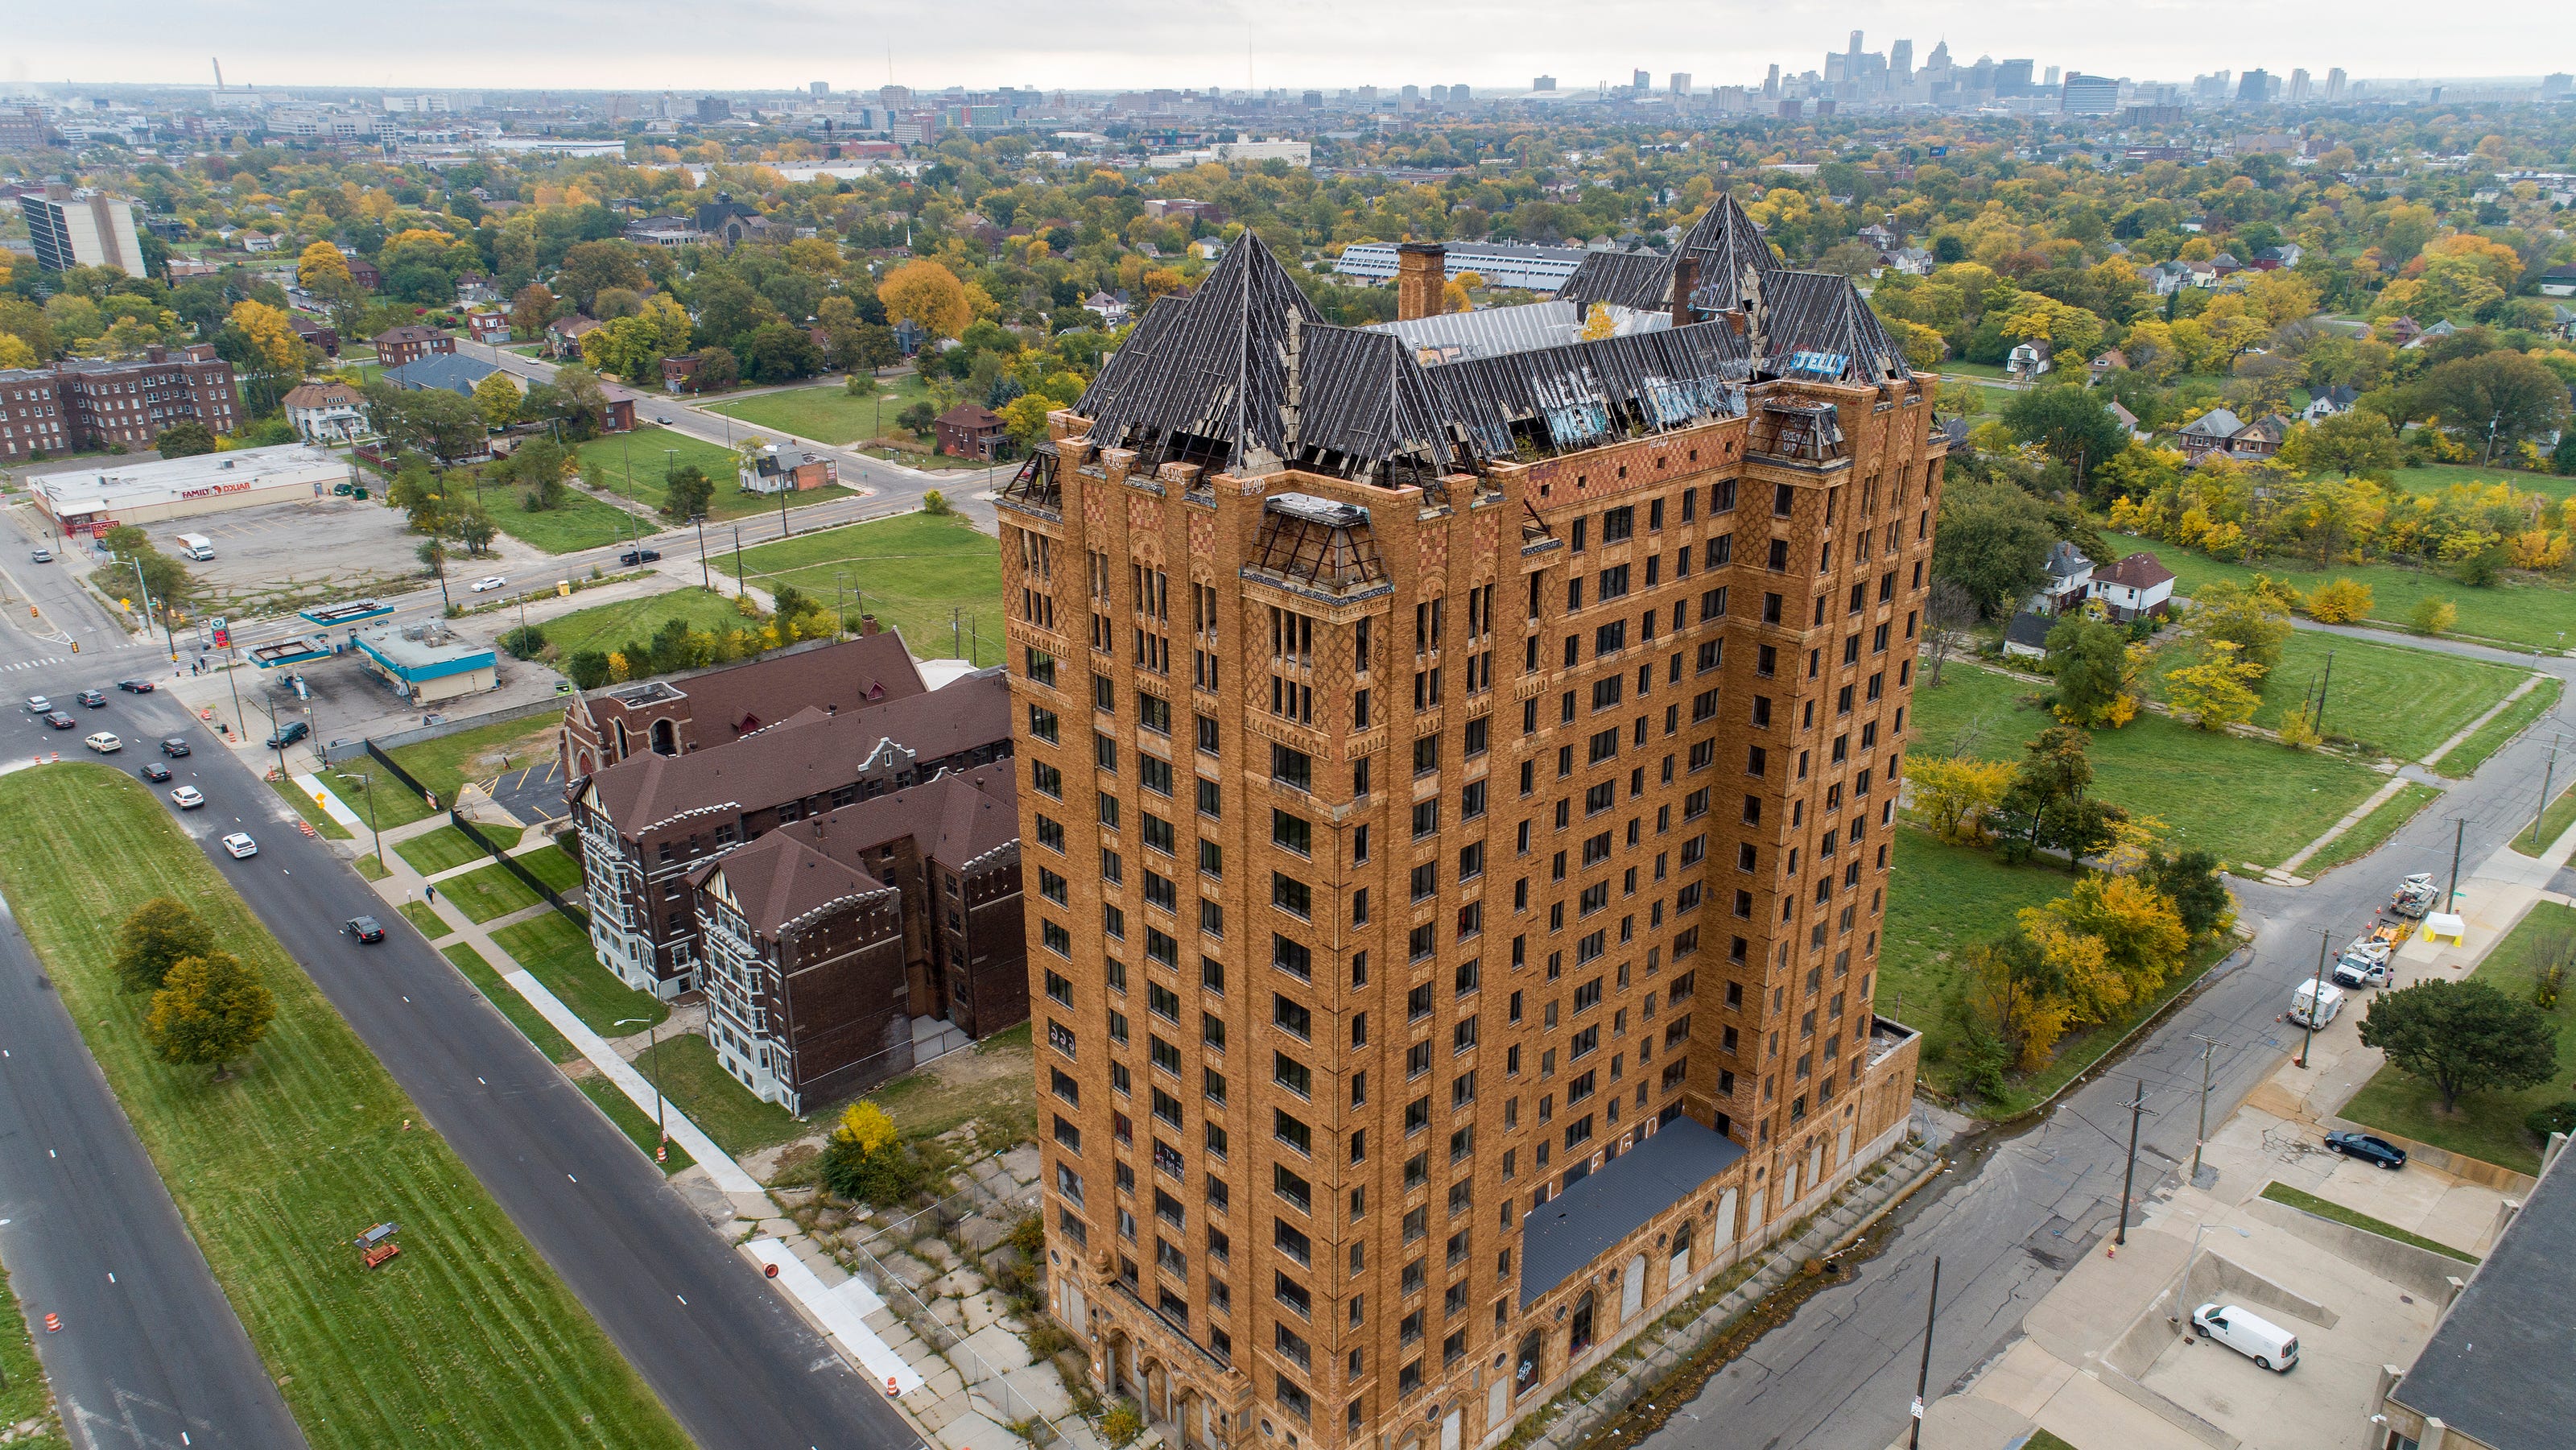 $7M in pandemic funds OK'd to renovate Detroit's historic Lee Plaza